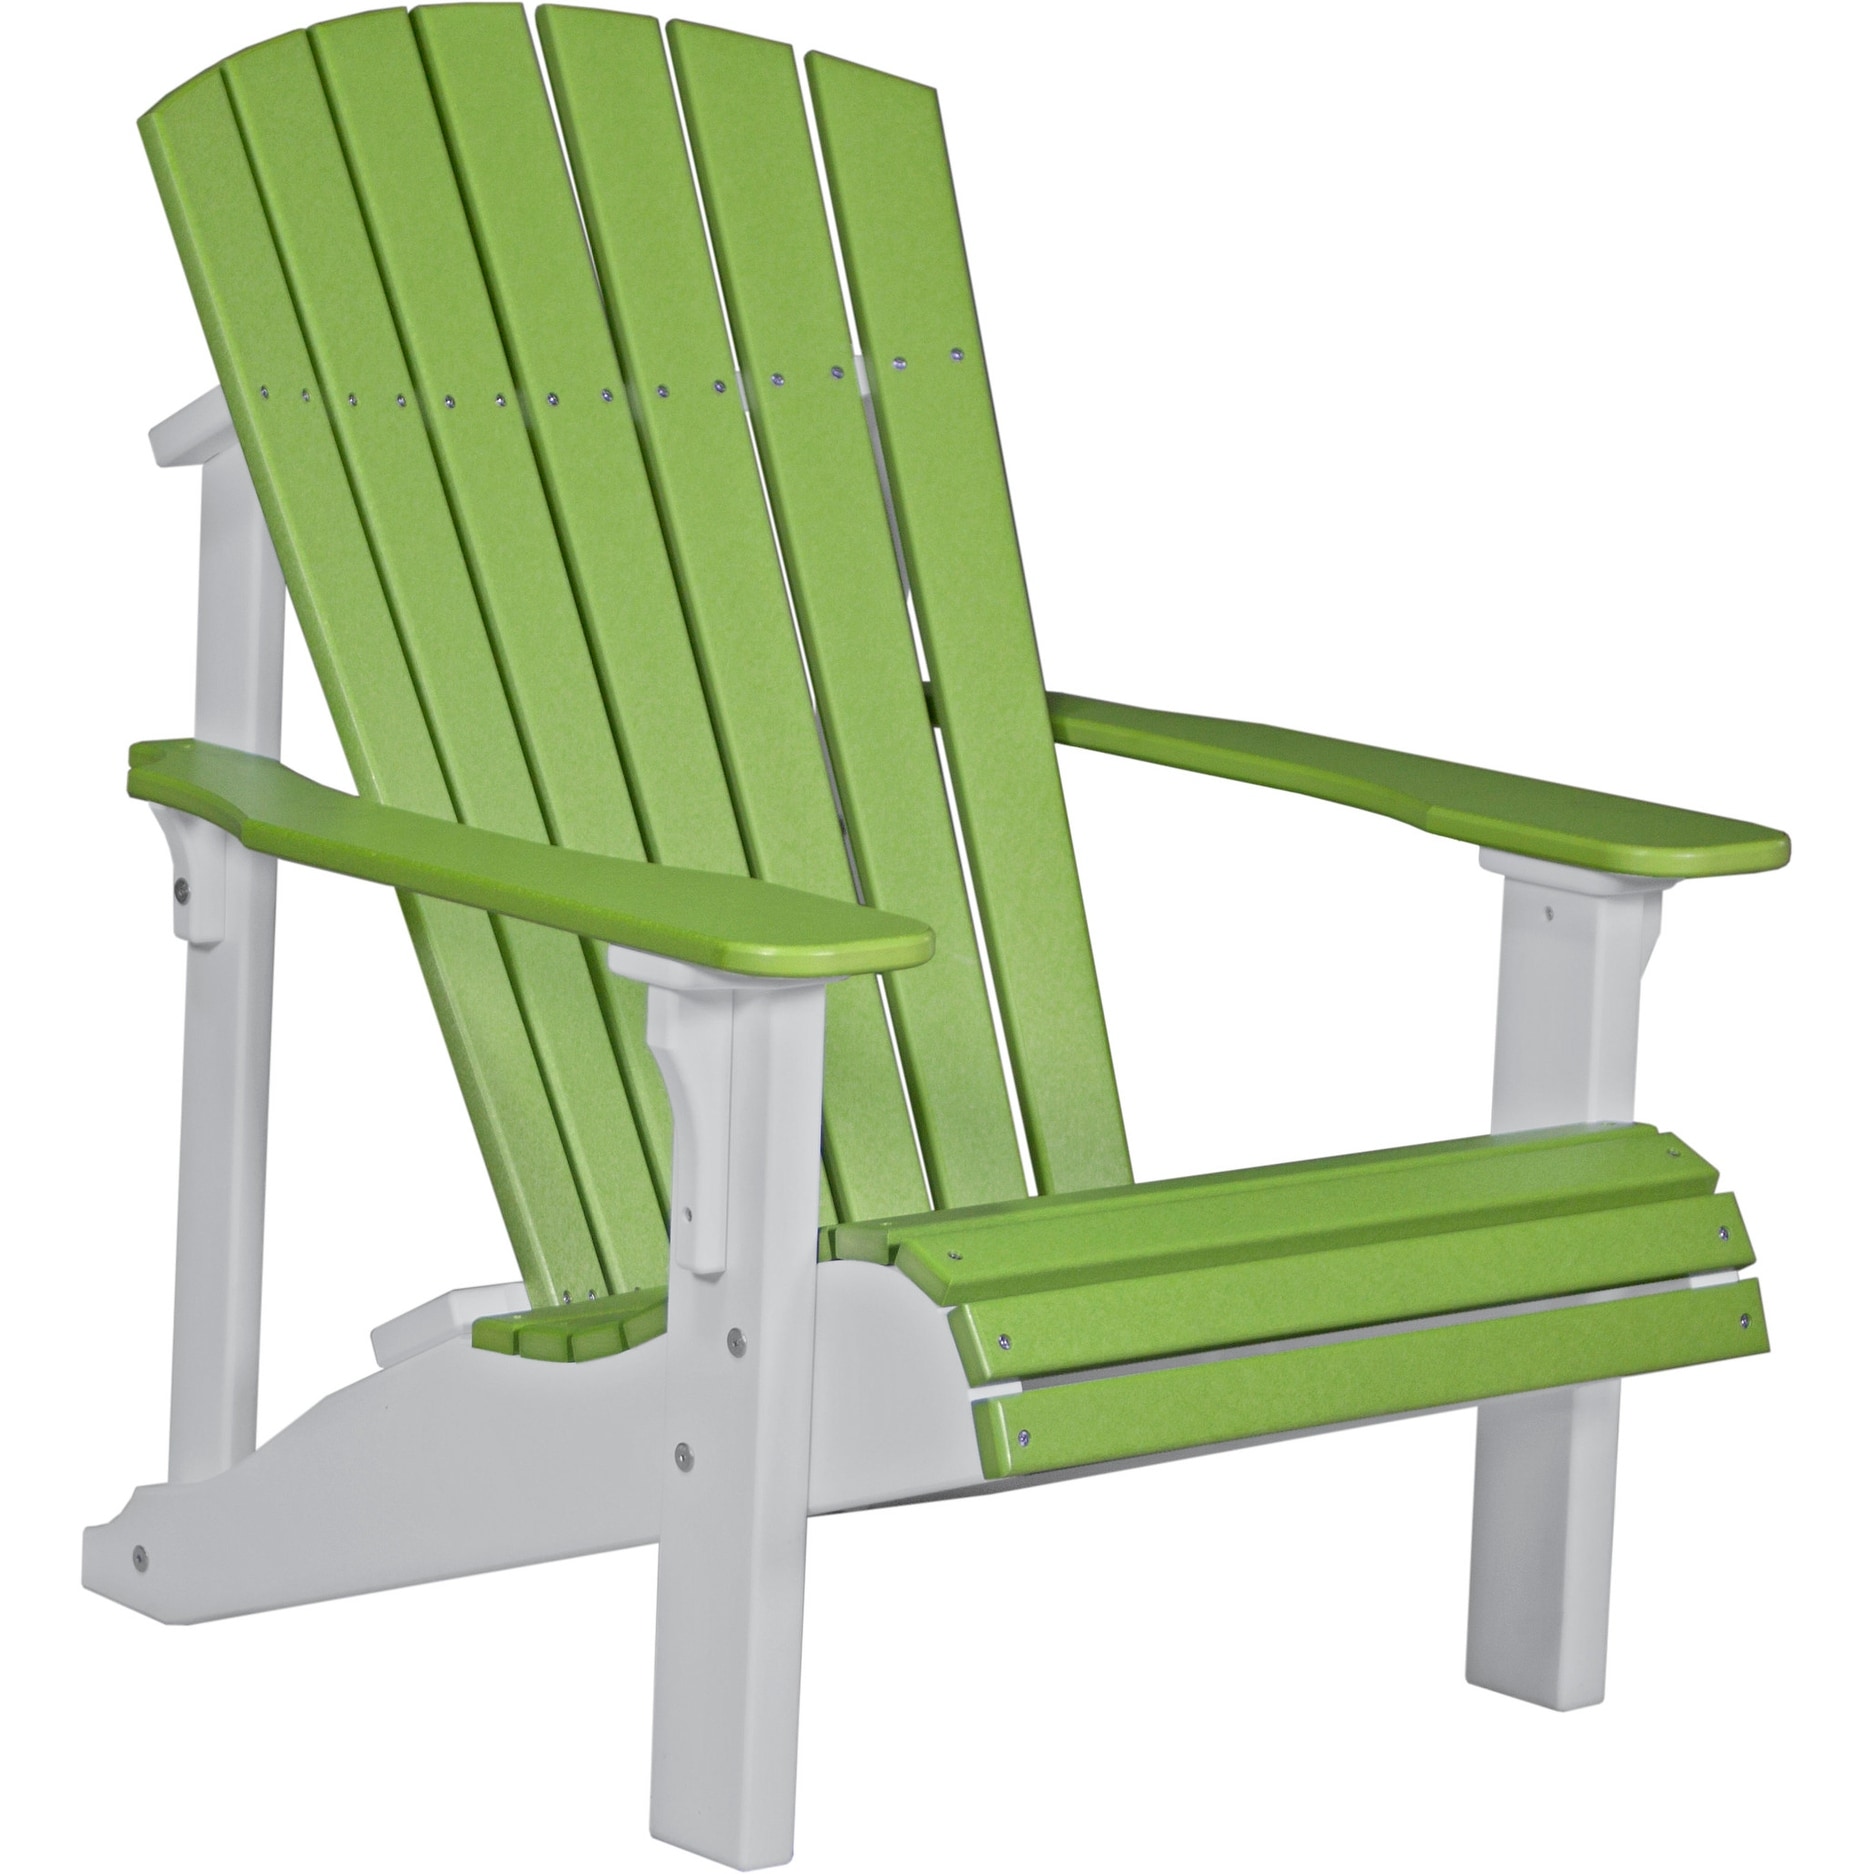 Poly Lumber Deluxe Adirondack Chair